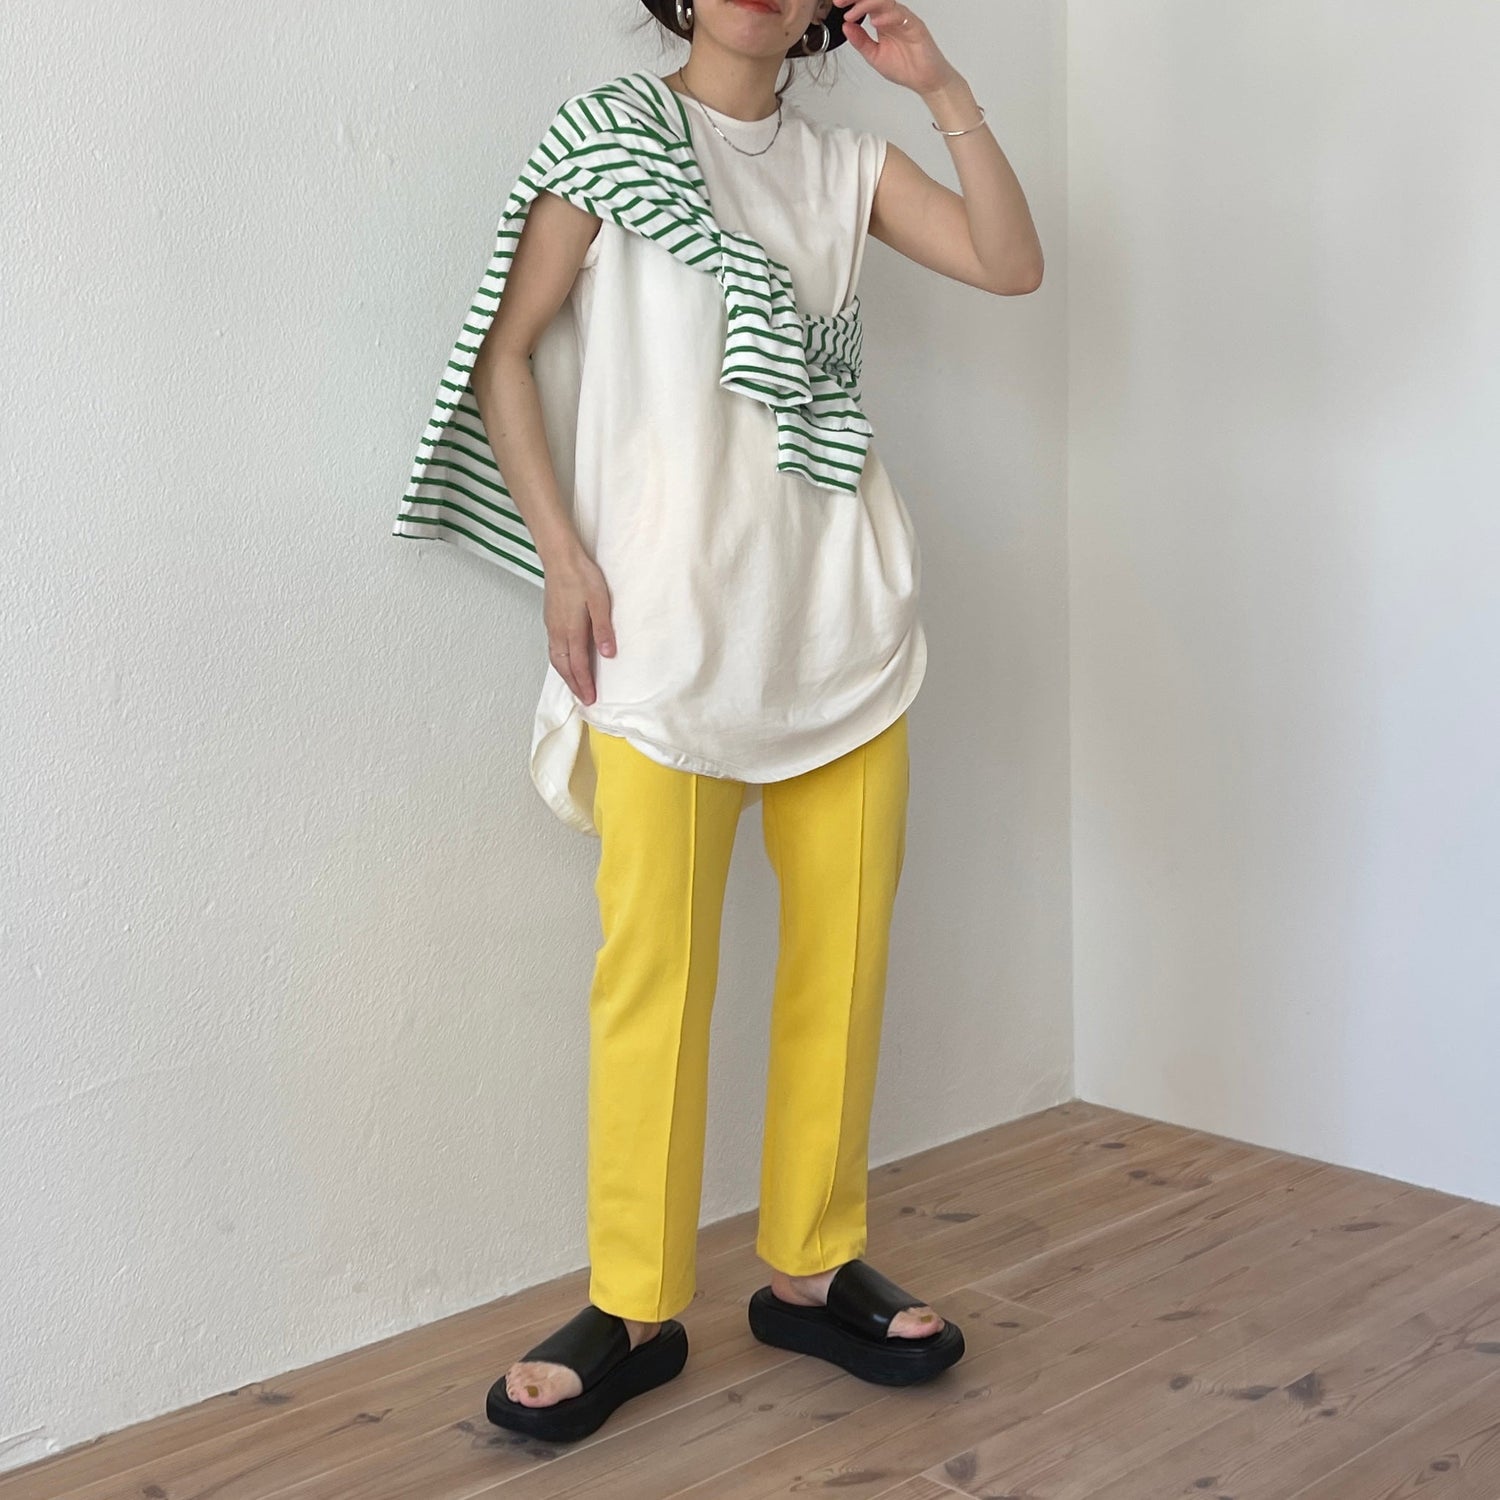 【SAMPLE】loose silhouette over size border tee / green